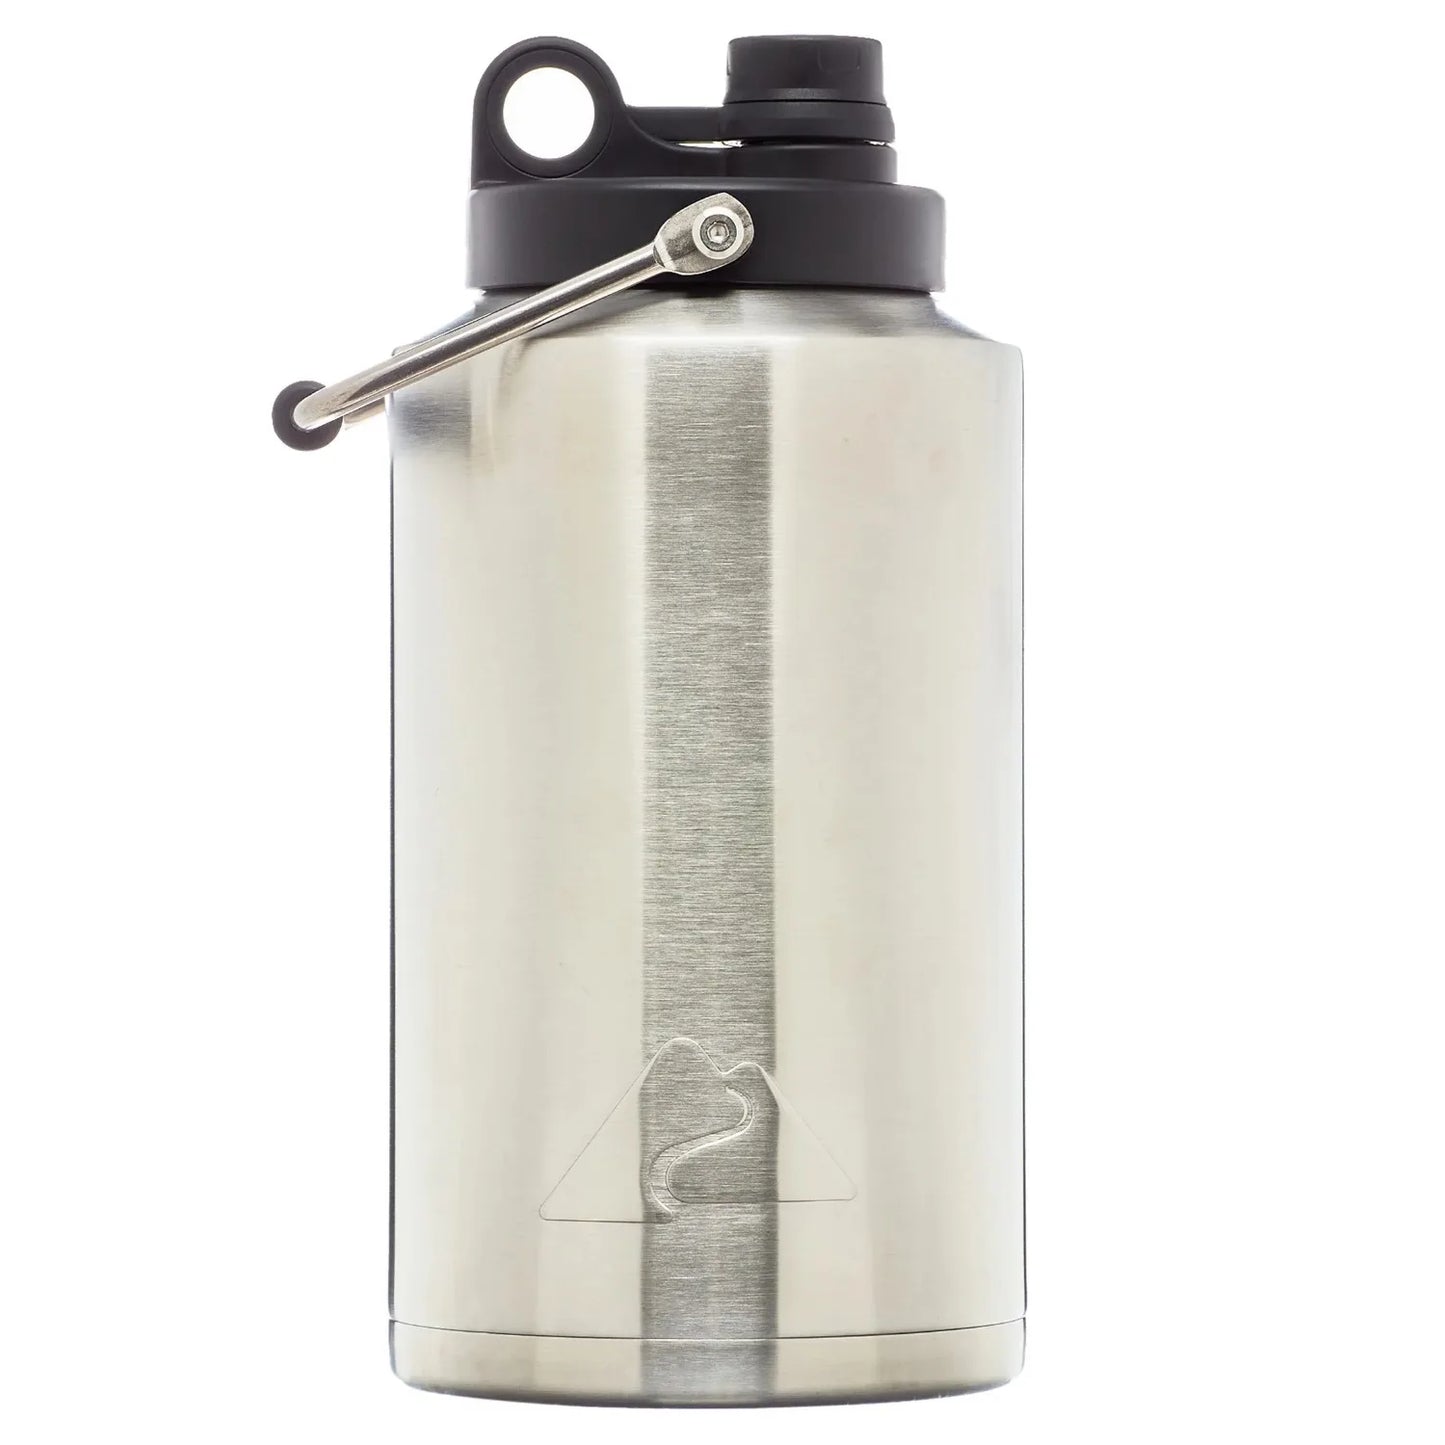 Stainless Steel 1 Gallon Water Jug Bottles 6.30 x 7.28 x 13.19 Inches